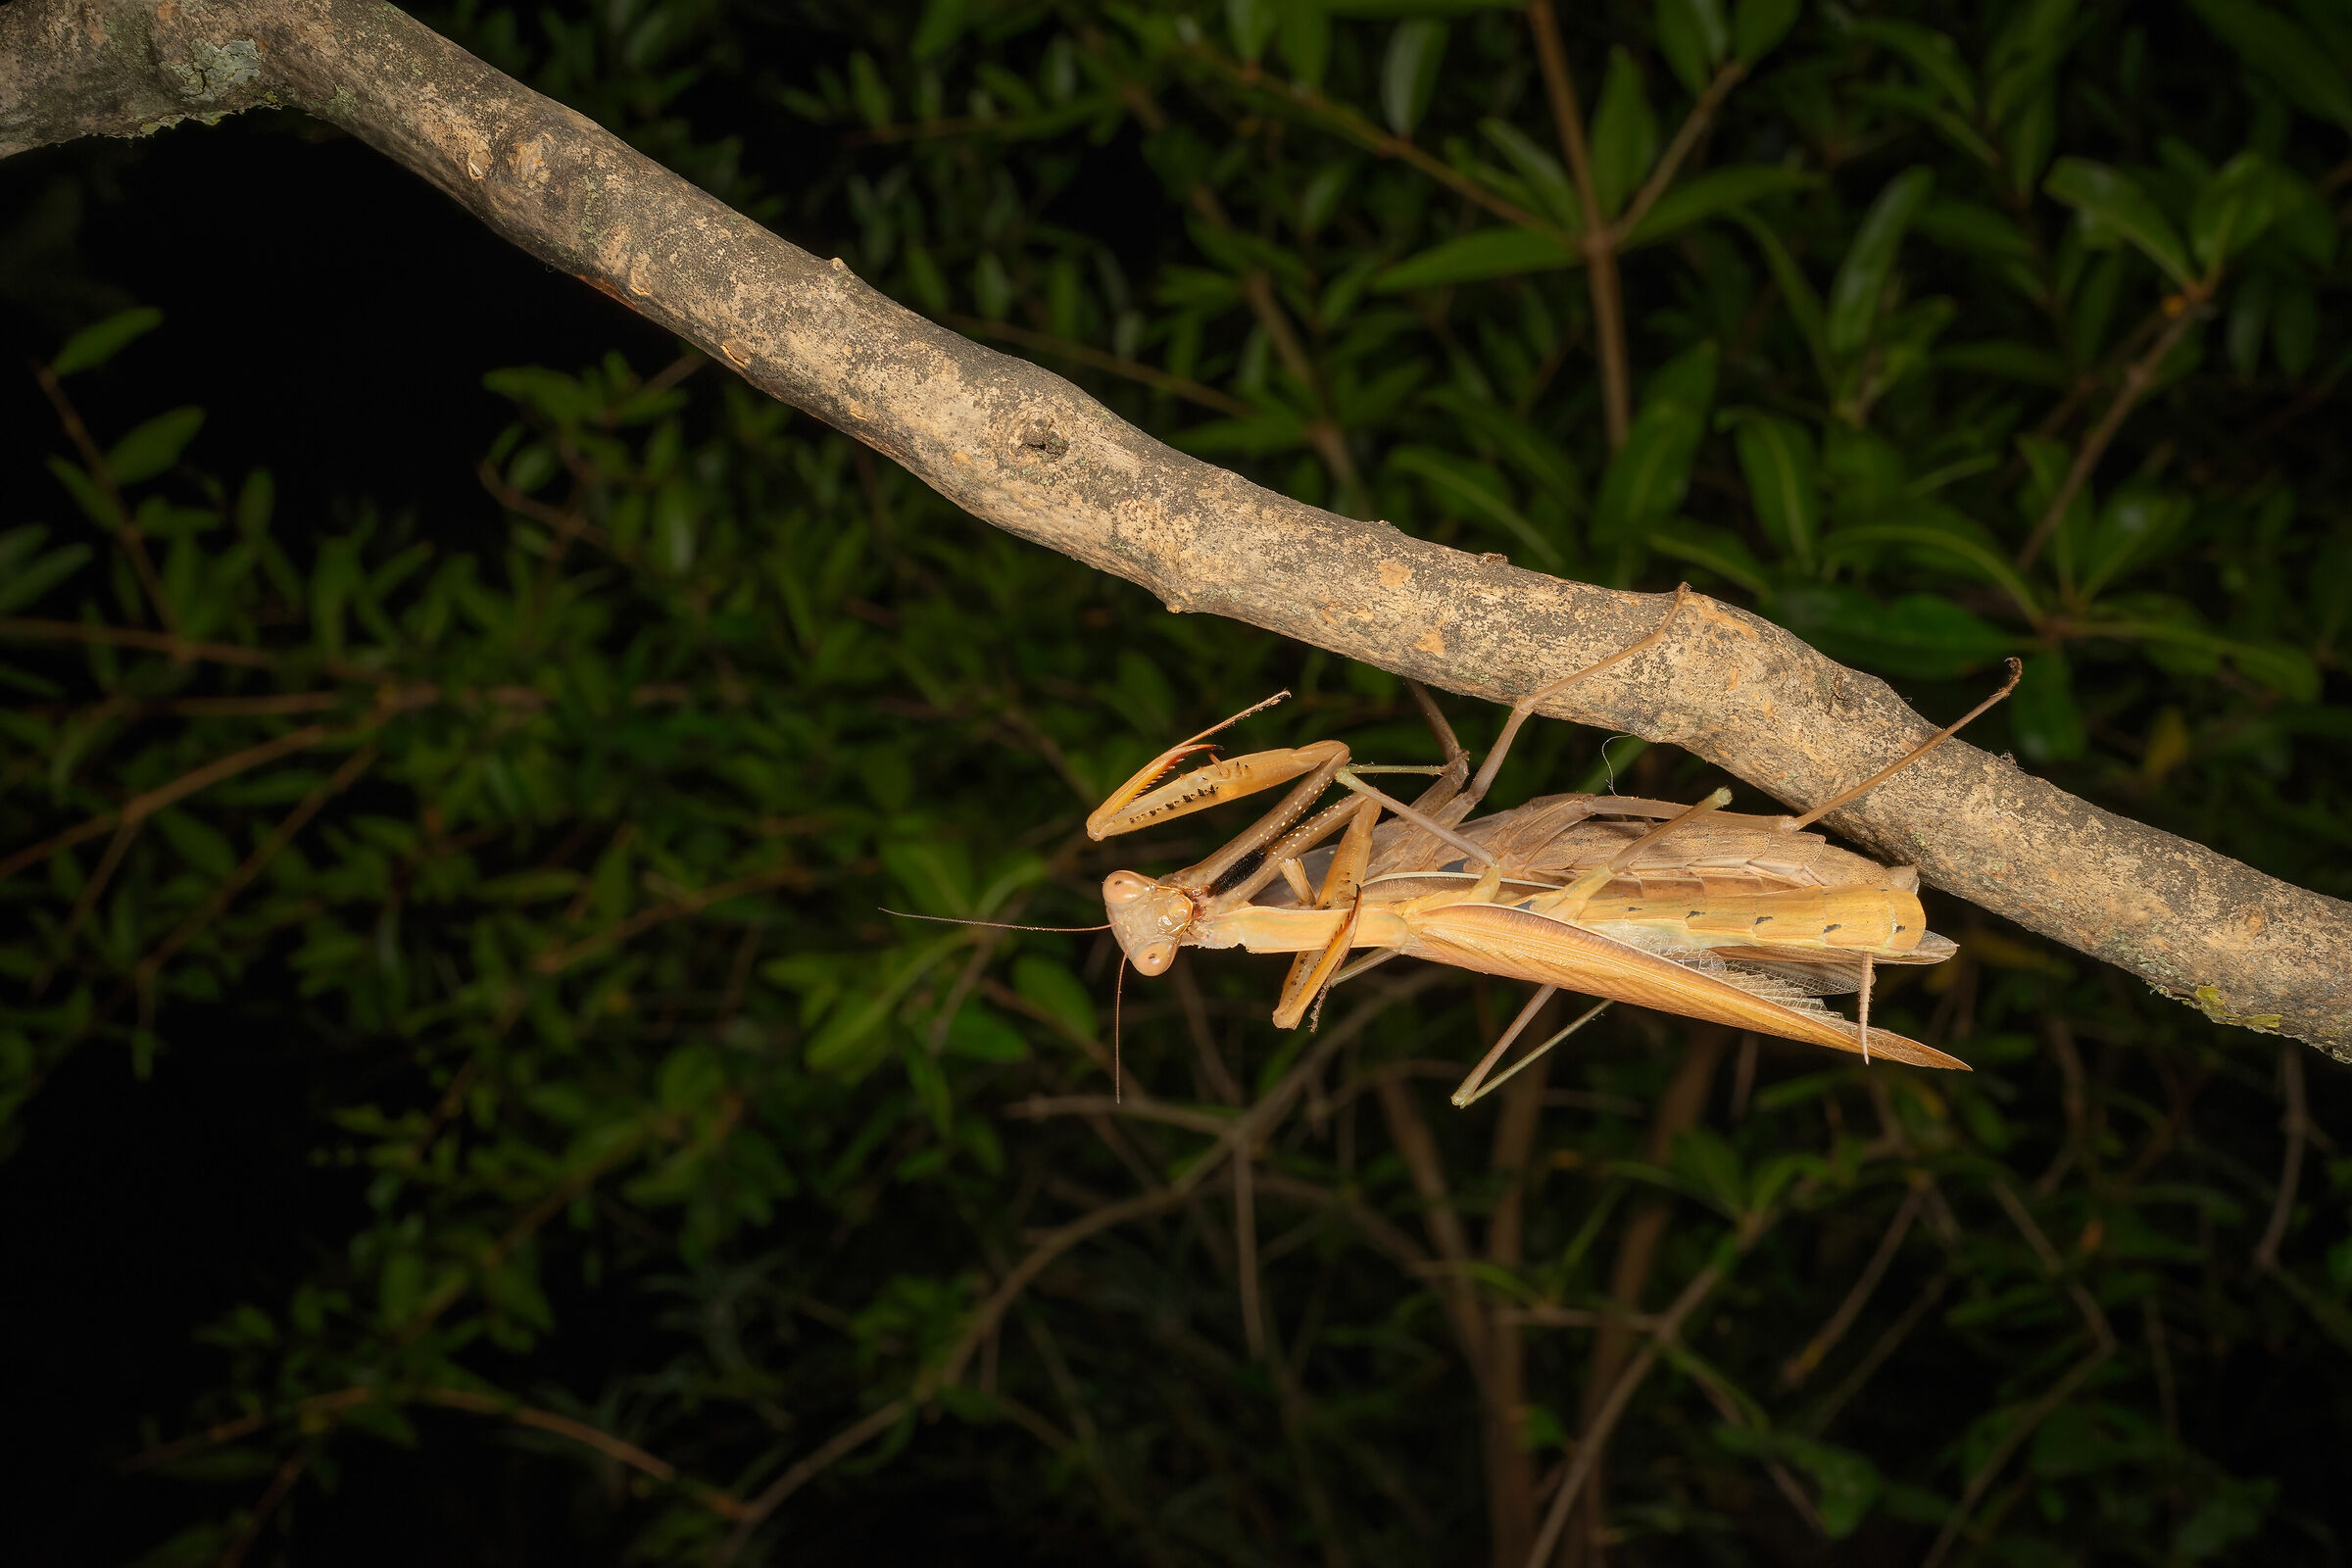 The Mating of the Mantis, 4...